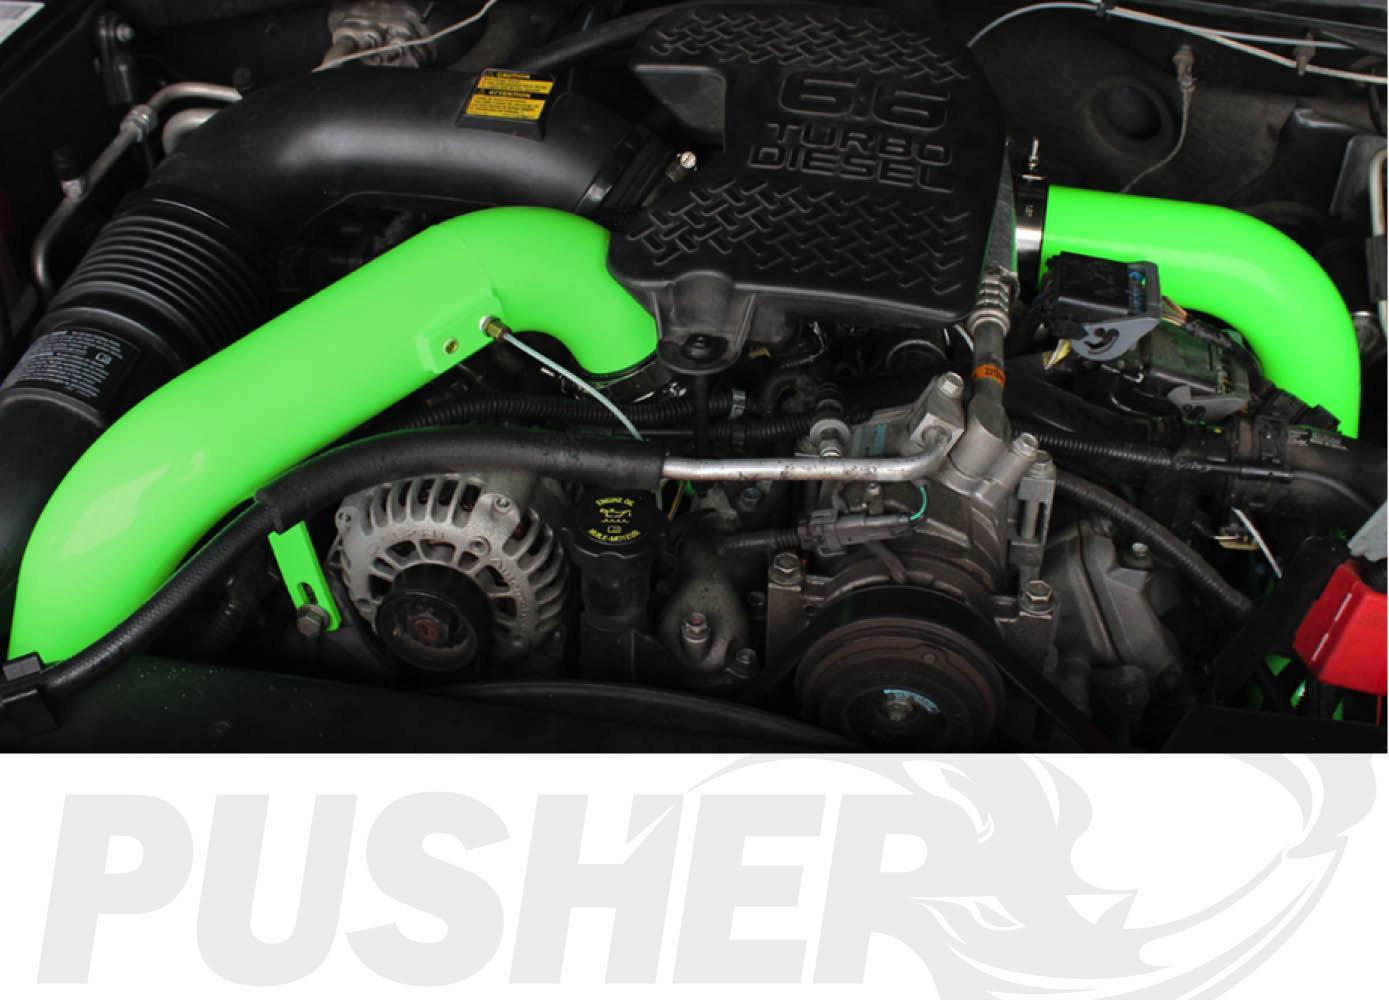 2004.5-2005 Duramax HD Charge Tube Package (PGD0405KT)-Intercooler Piping-Pusher-Dirty Diesel Customs